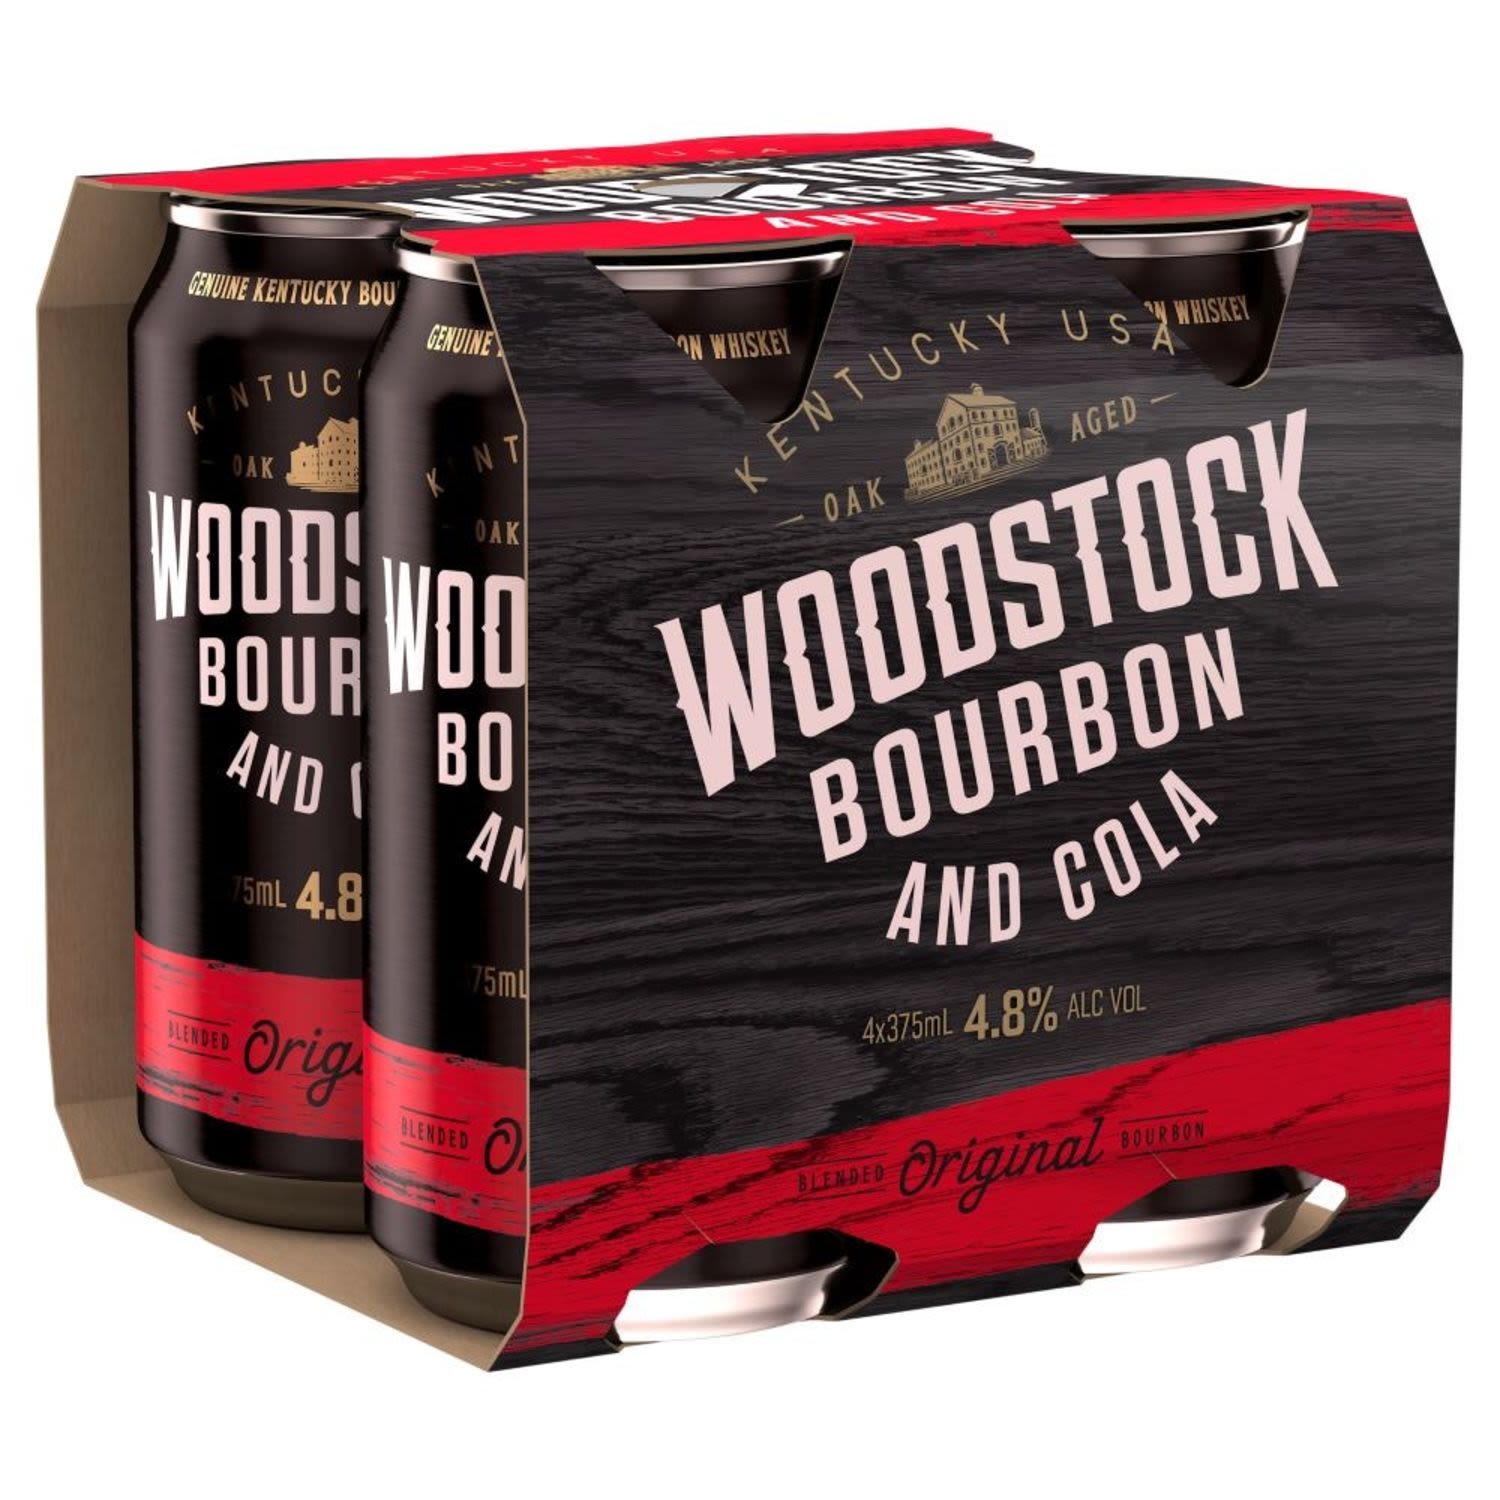 Woodstock Bourbon & Cola 4.8% Can 375mL 4 Pack